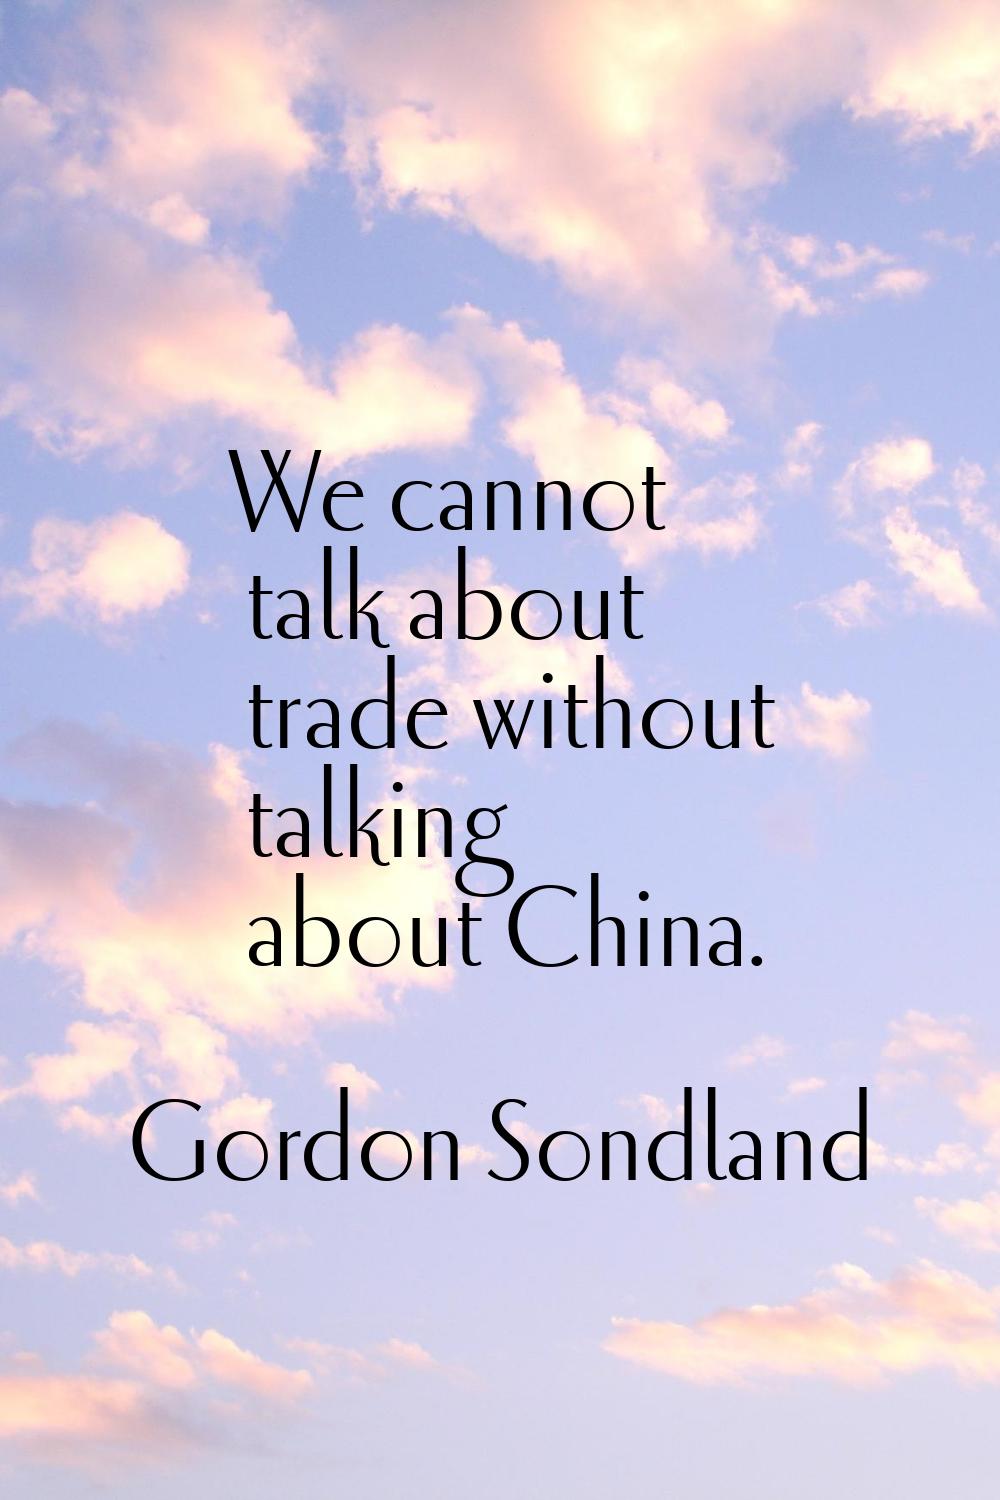 We cannot talk about trade without talking about China.